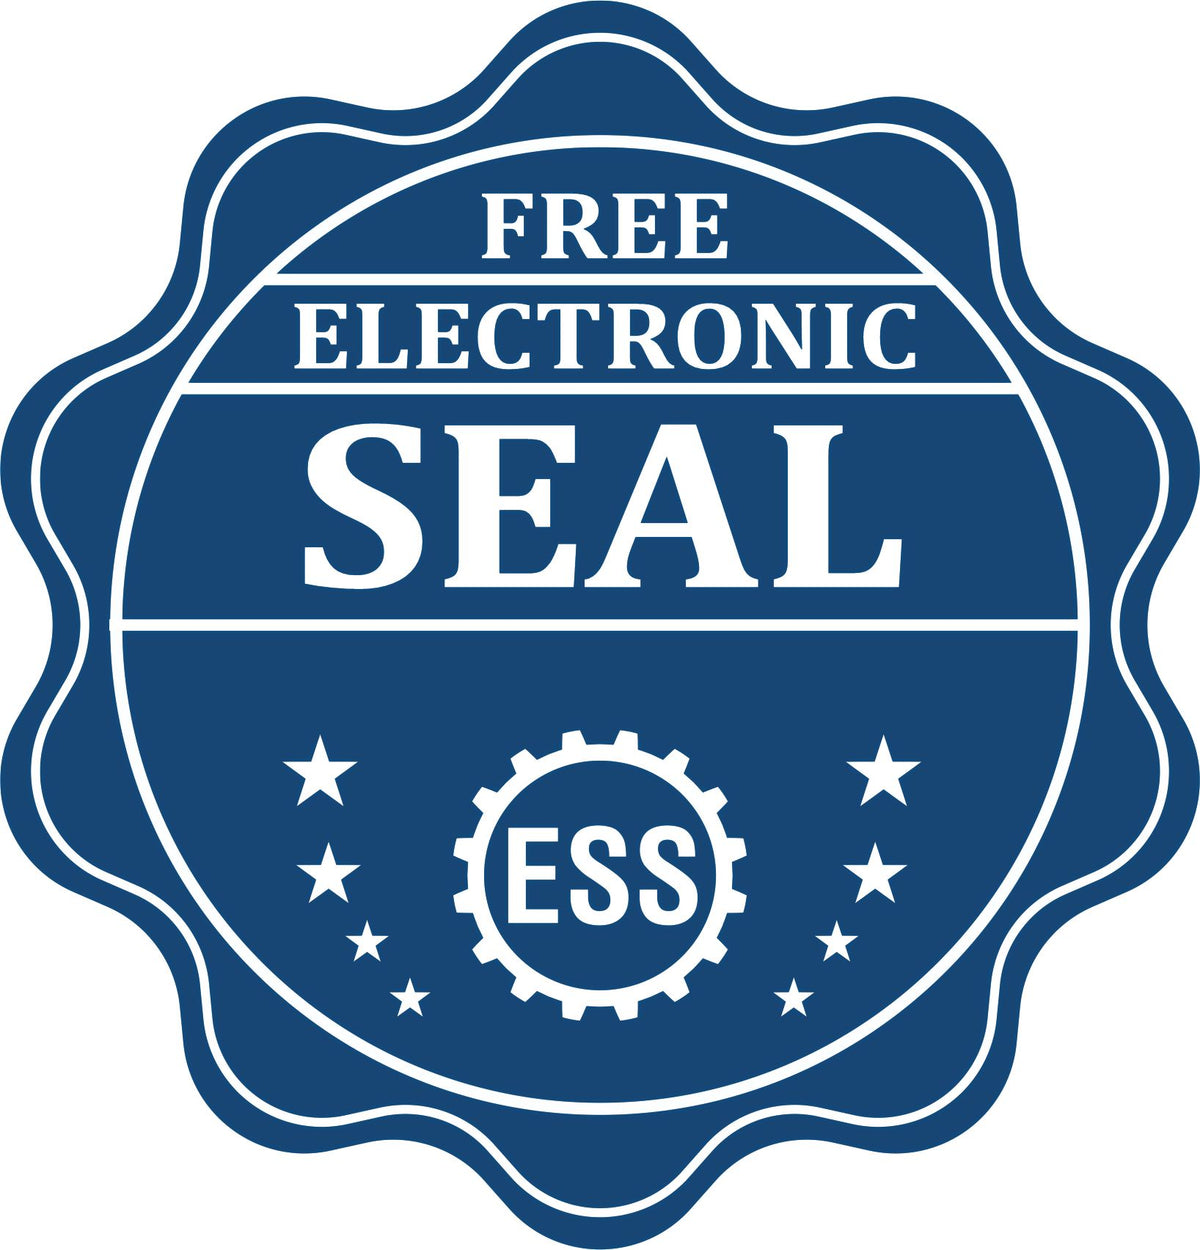 A badge showing a free electronic seal for the Hybrid Pennsylvania Land Surveyor Seal with stars and the ESS gear on the emblem.